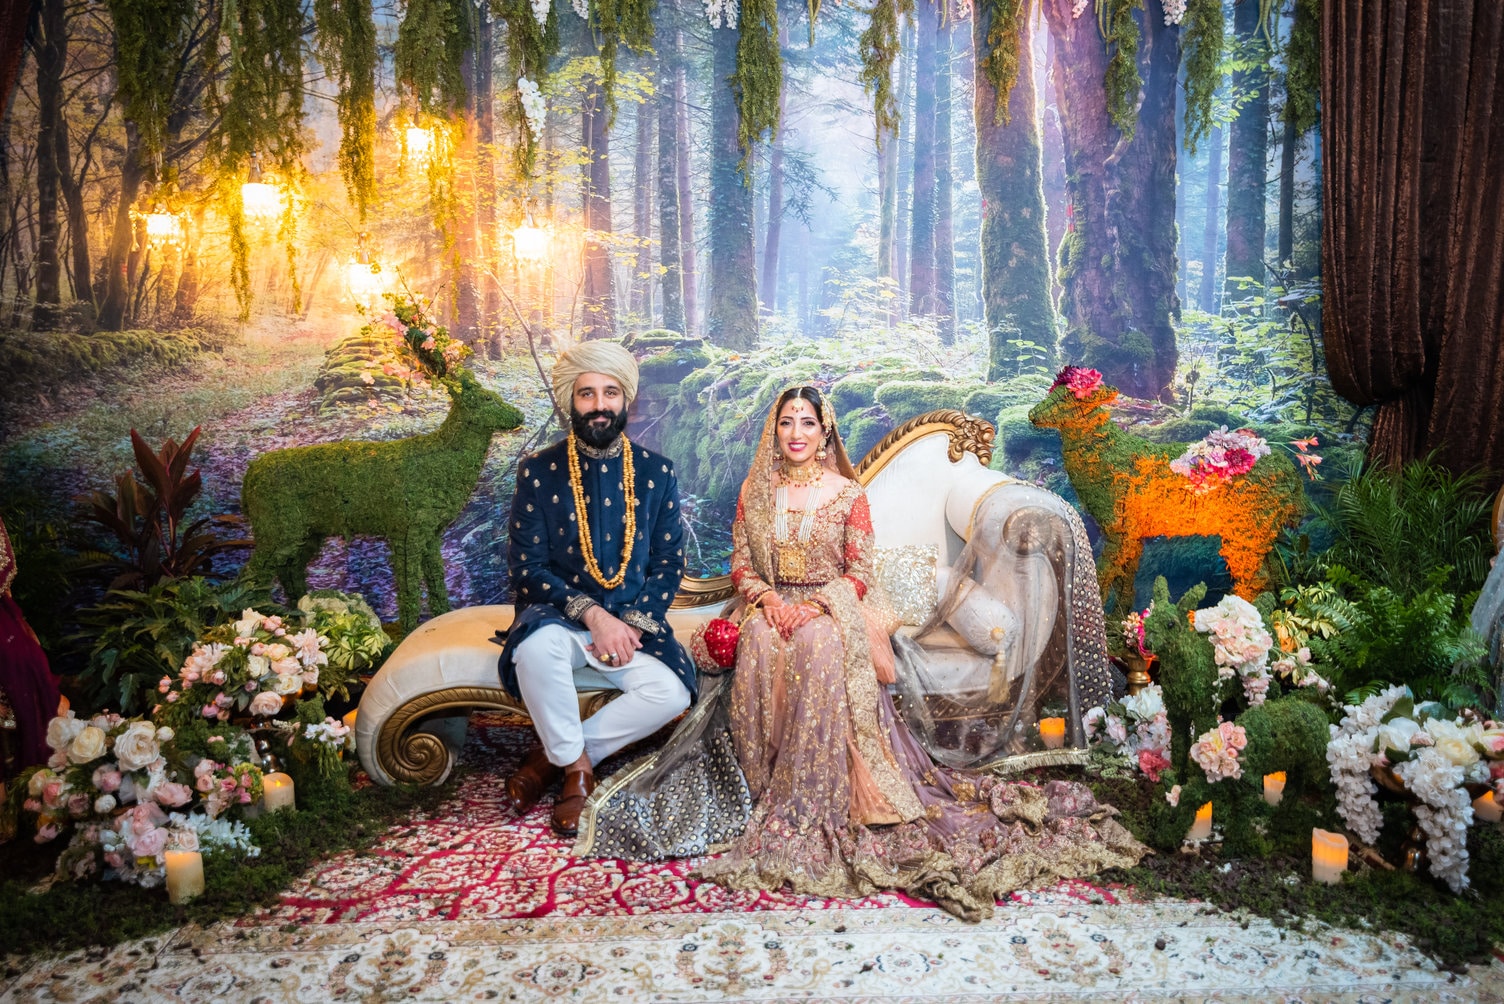 bride and groom sitting on lounge in front of painted landscape detailing an enchanted forest